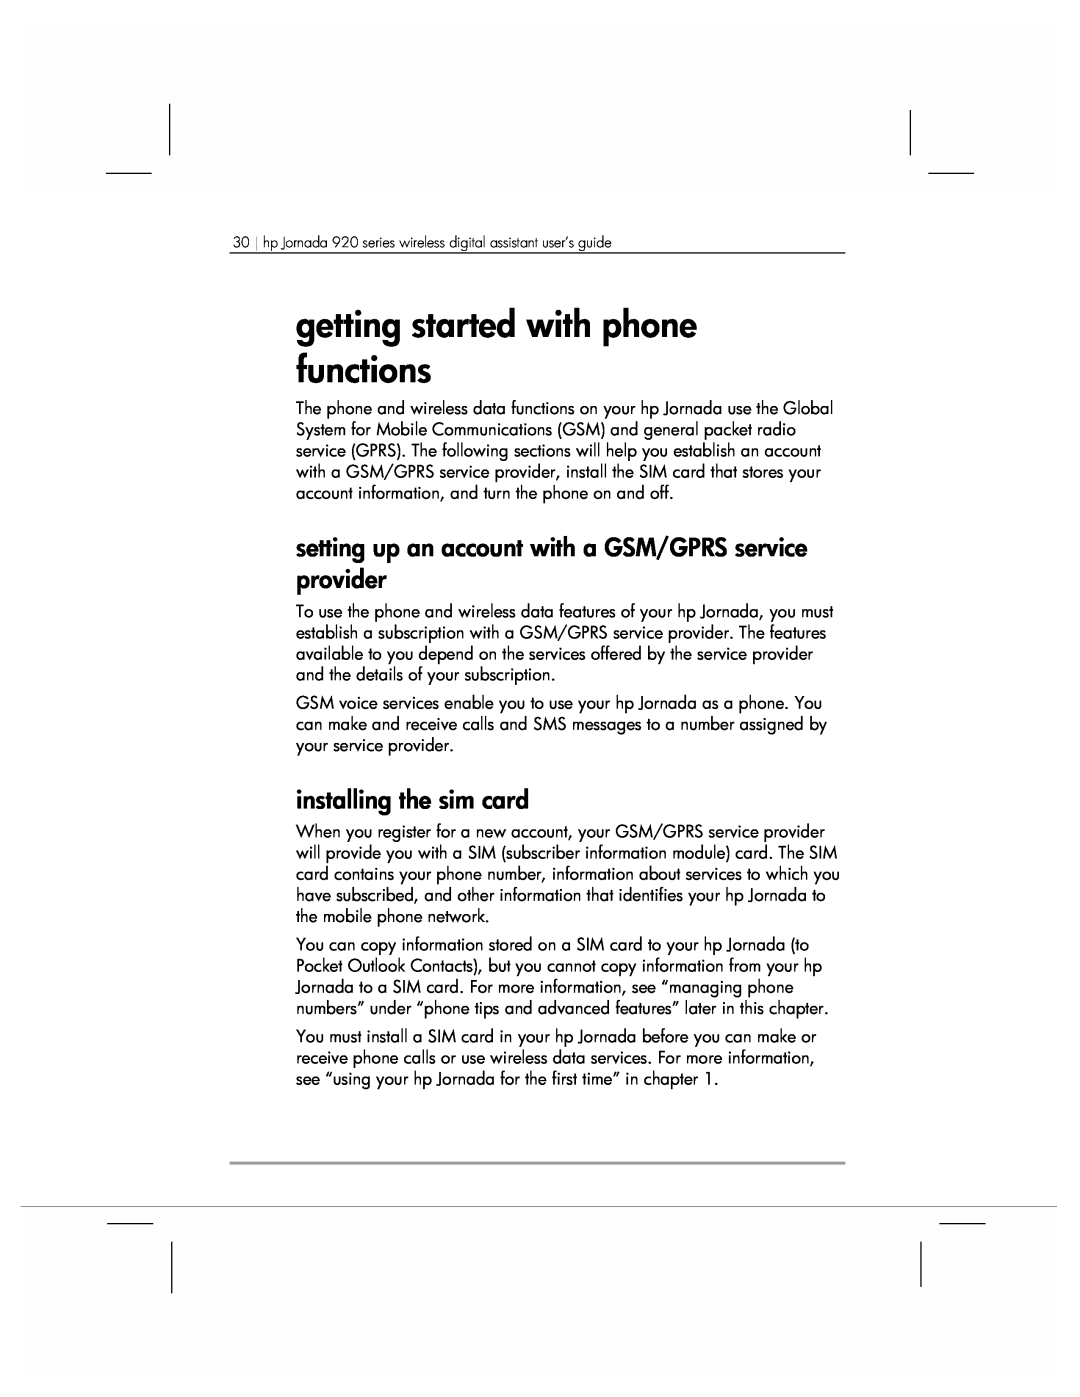 HP 920 manual getting started with phone functions, setting up an account with a GSM/GPRS service provider 